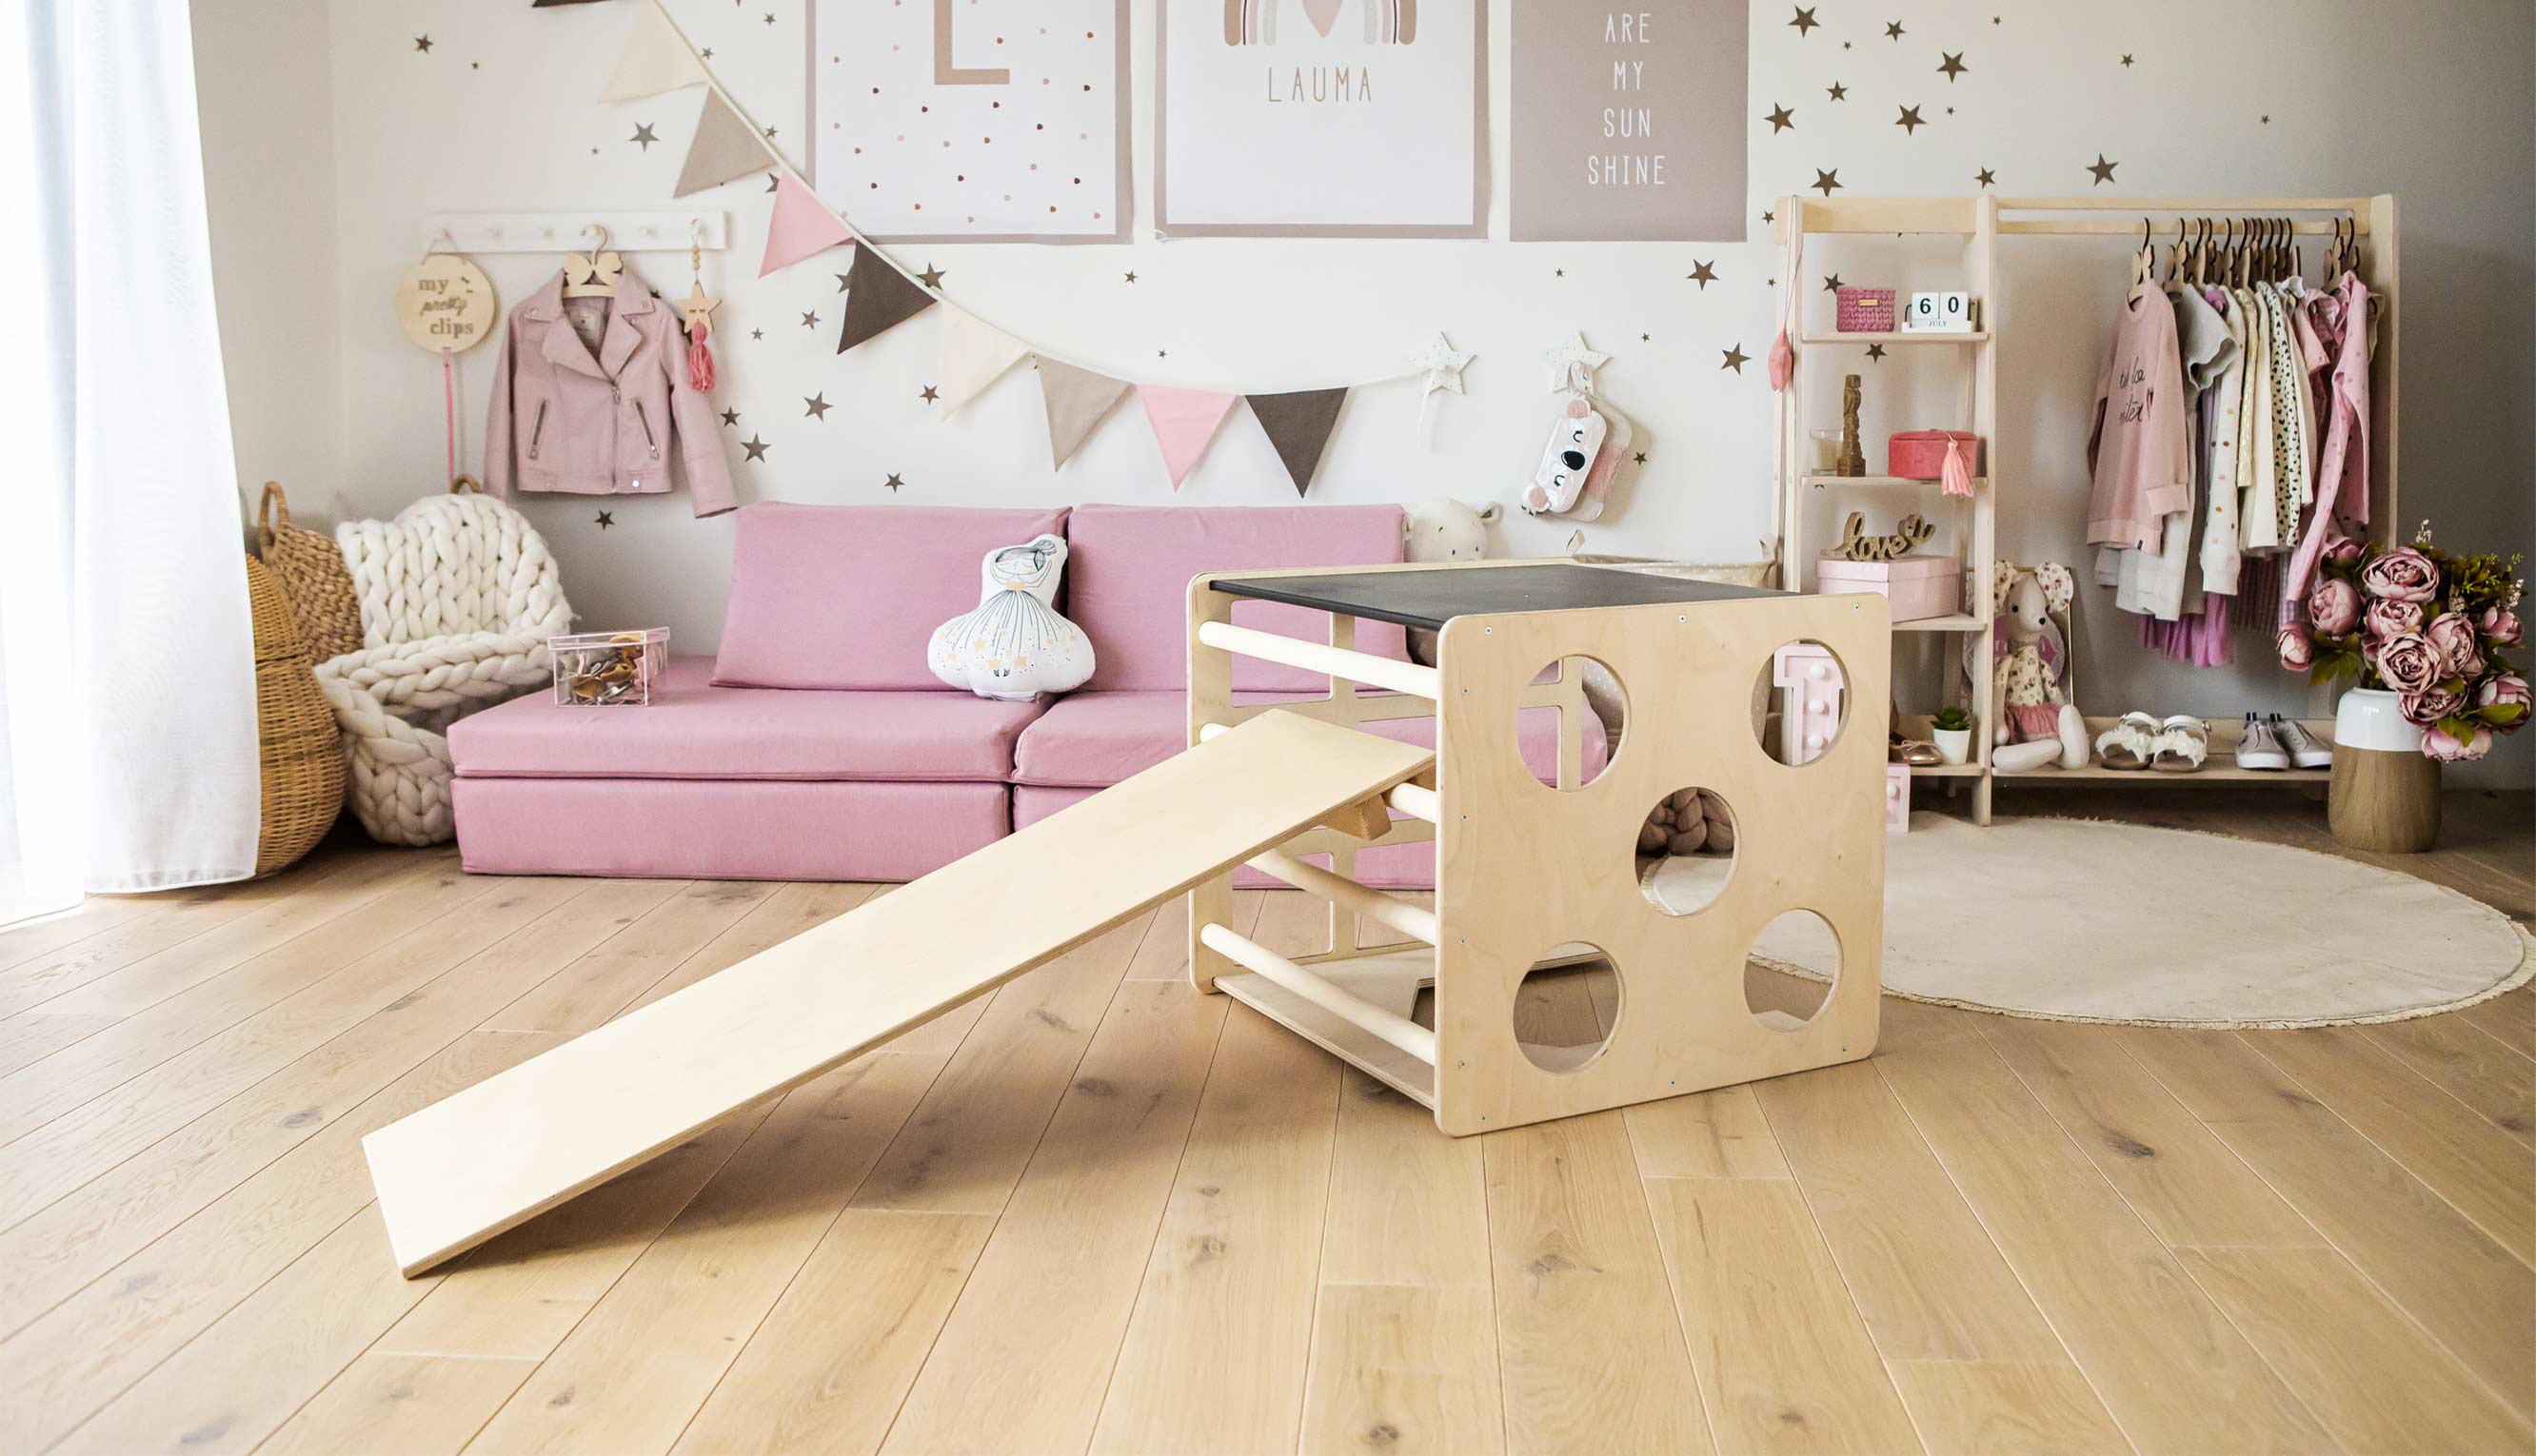 A children's room with a slide and a pink couch.